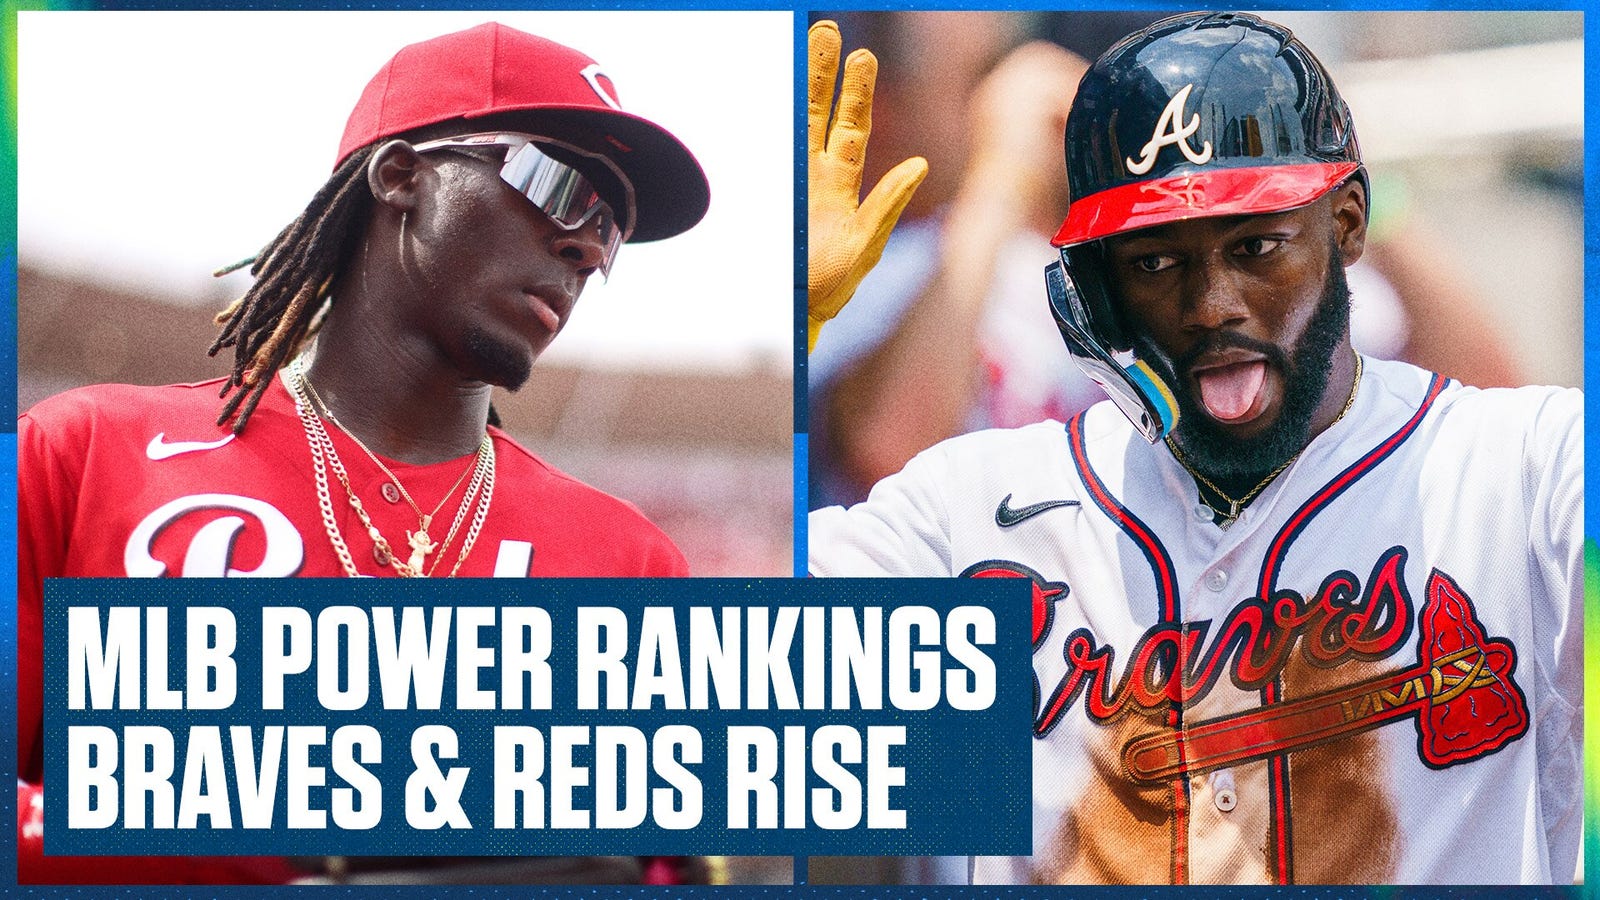 MLB Power Rankings: Braves move to No. 1, Reds continue to rise 